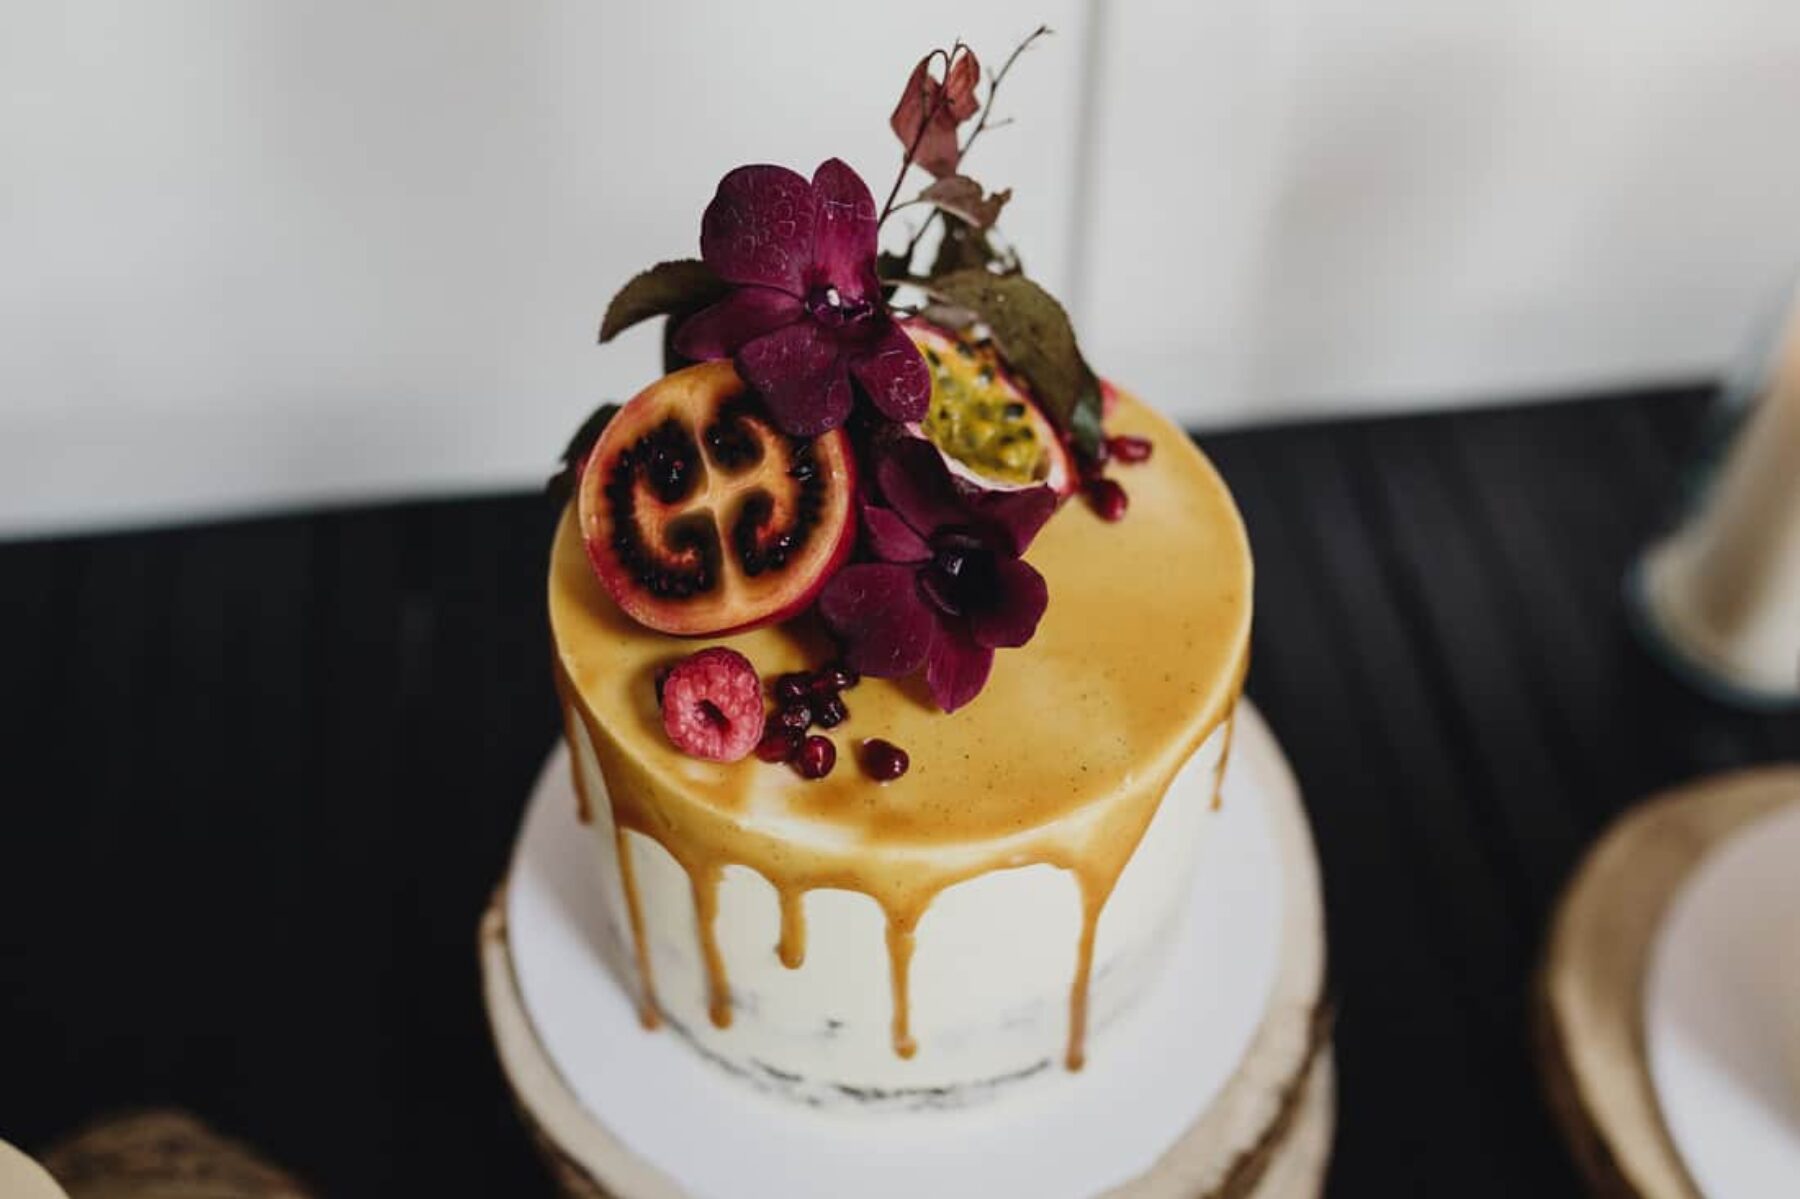 caramel drip cake with fresh fruit and flowers